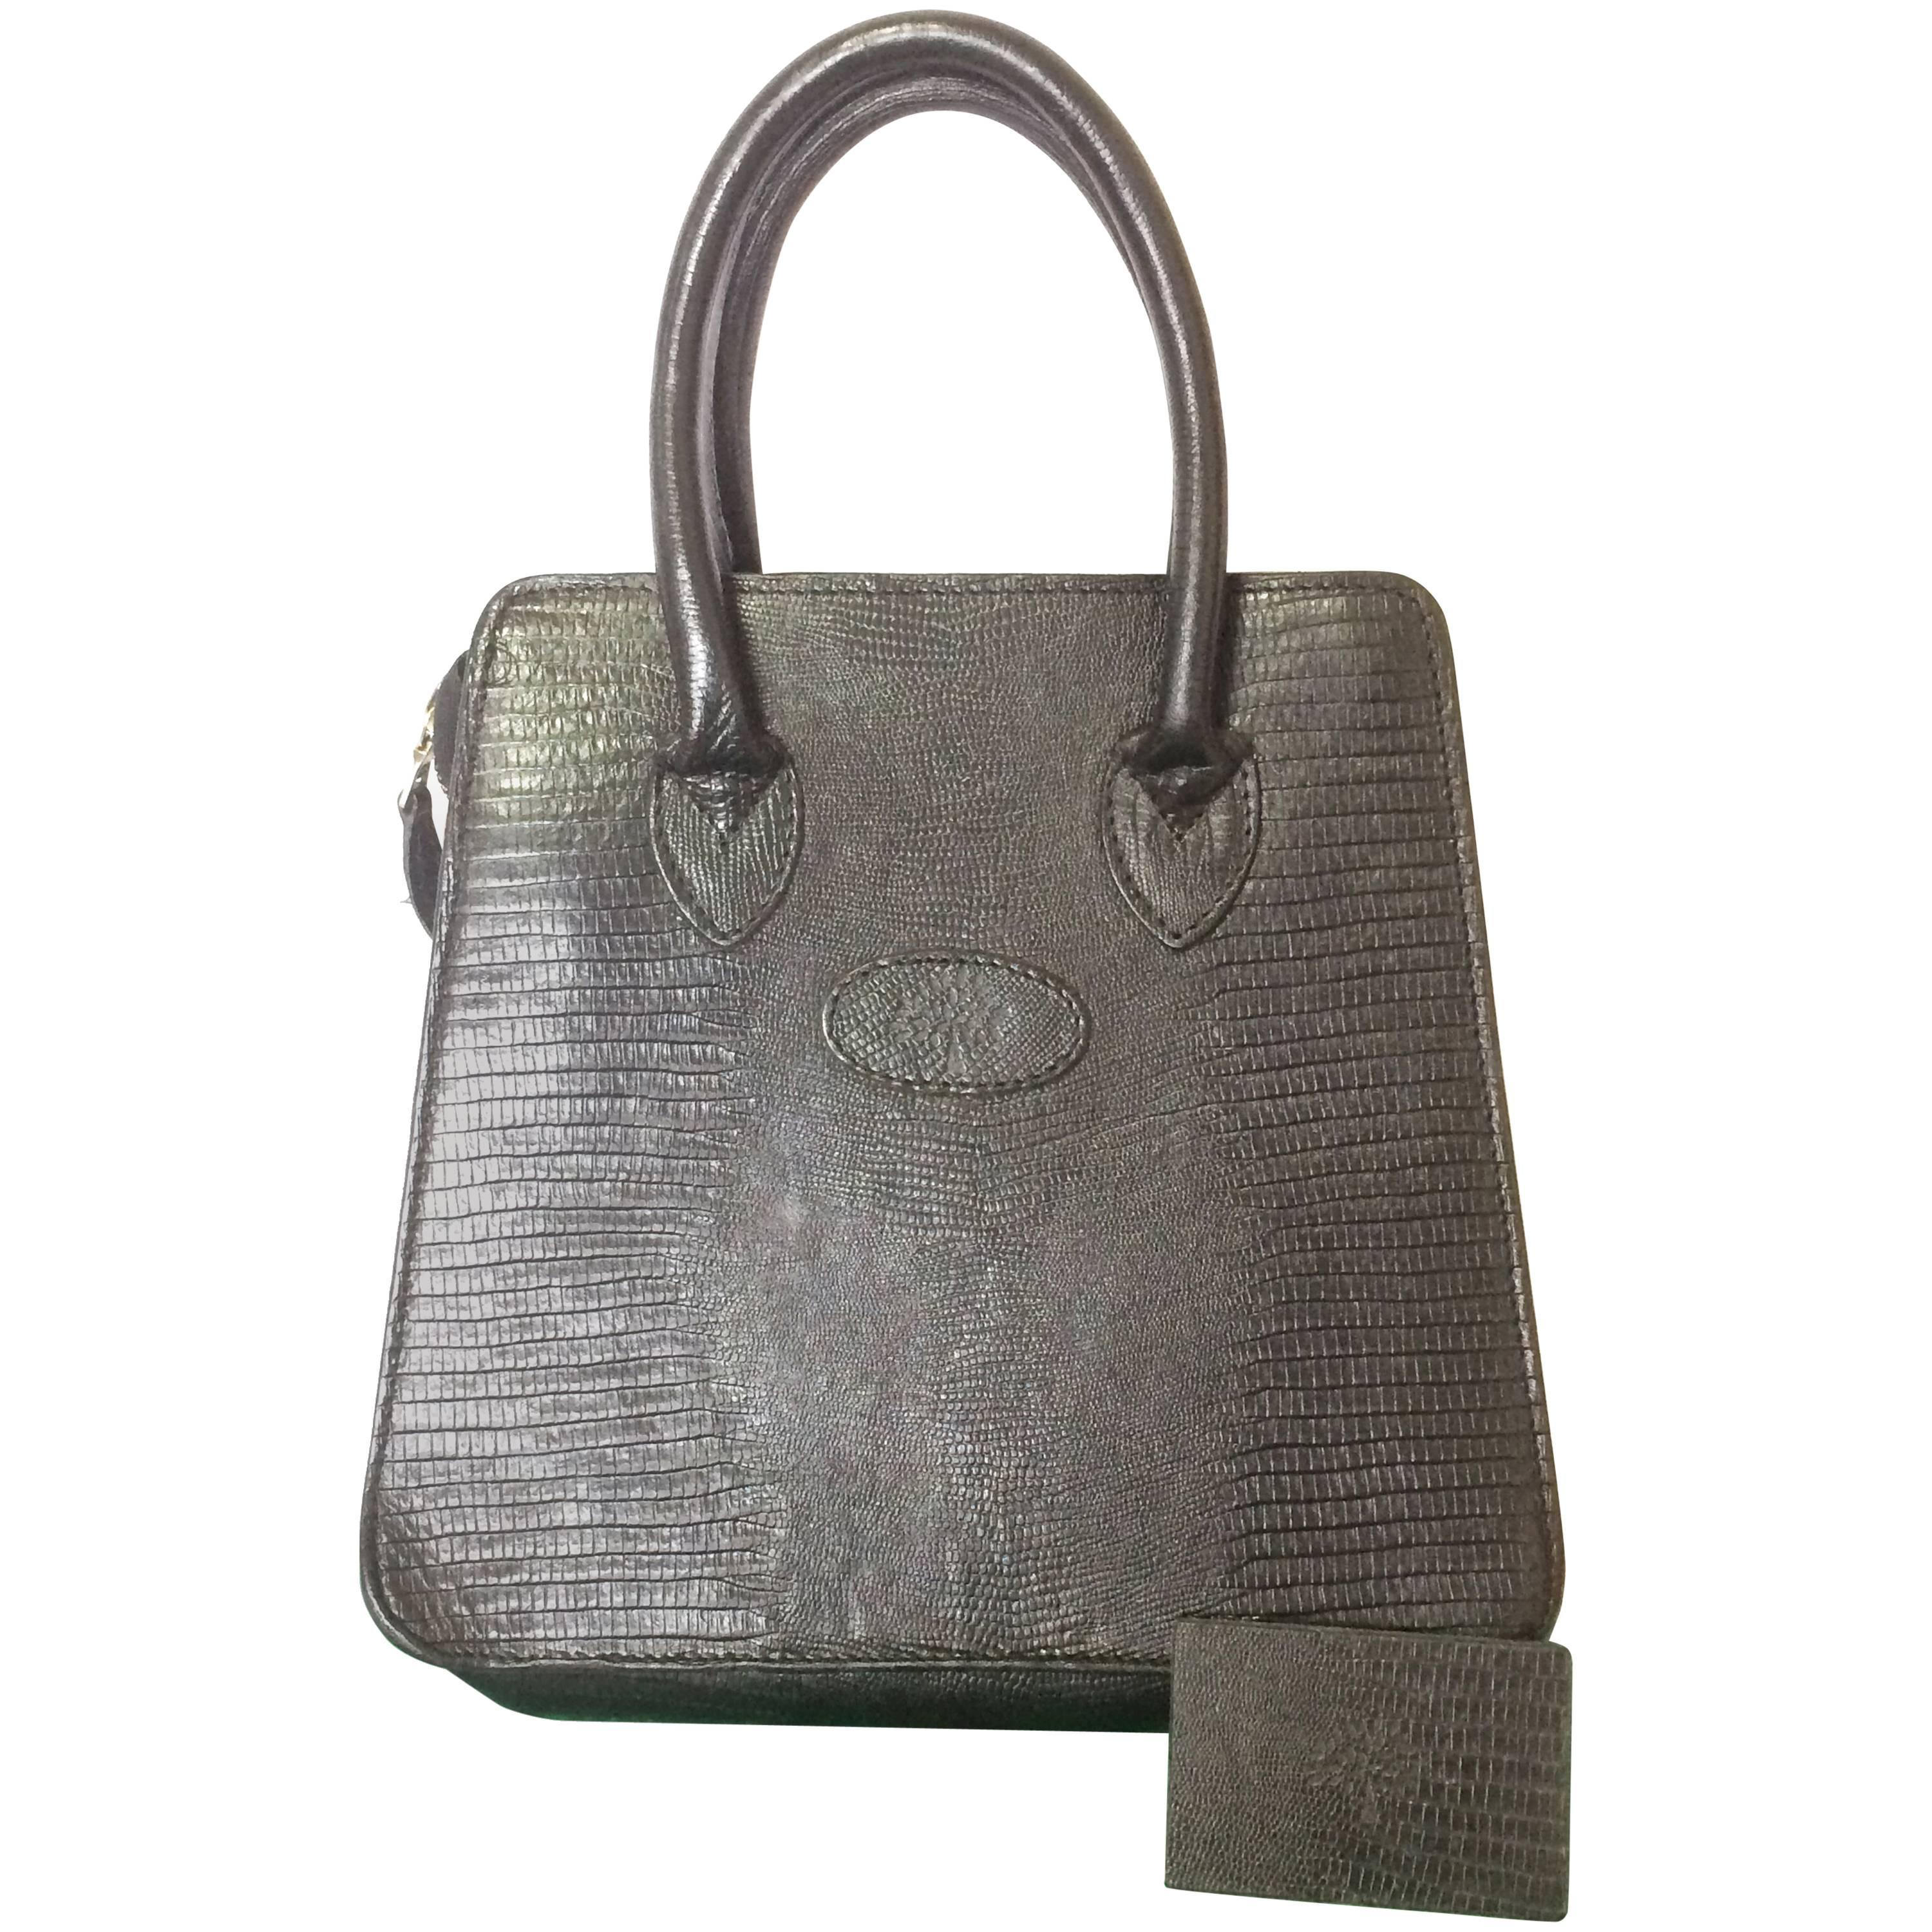 Vintage Mulberry lizard embossed black leather mini tote bag. By Roger Saul 